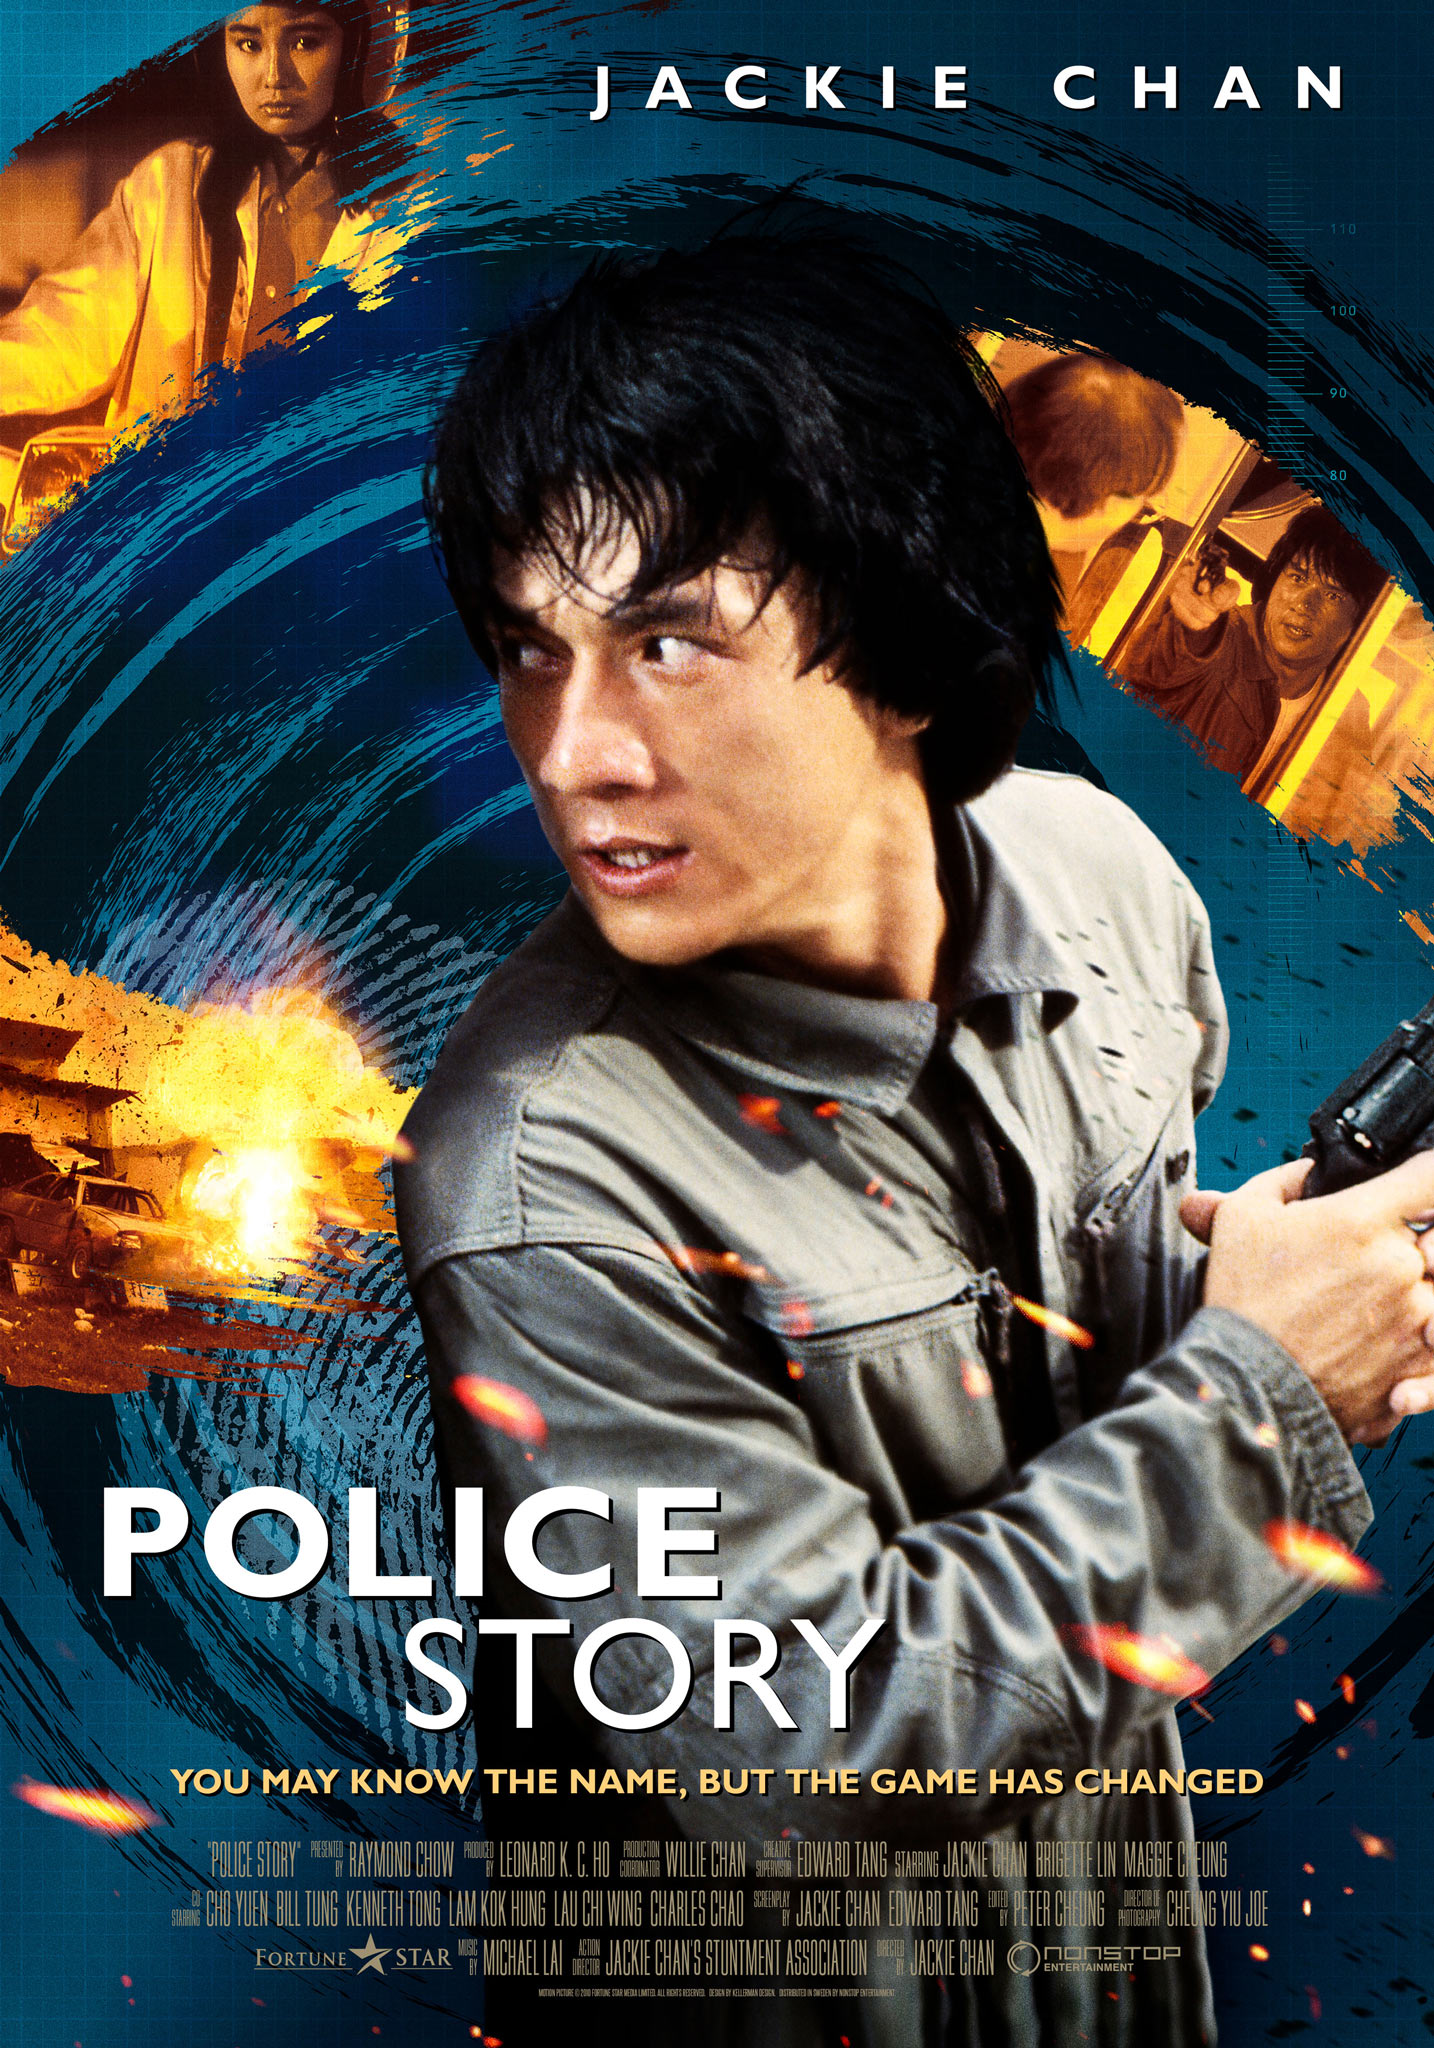 Police Story (1985) theatrical onesheet